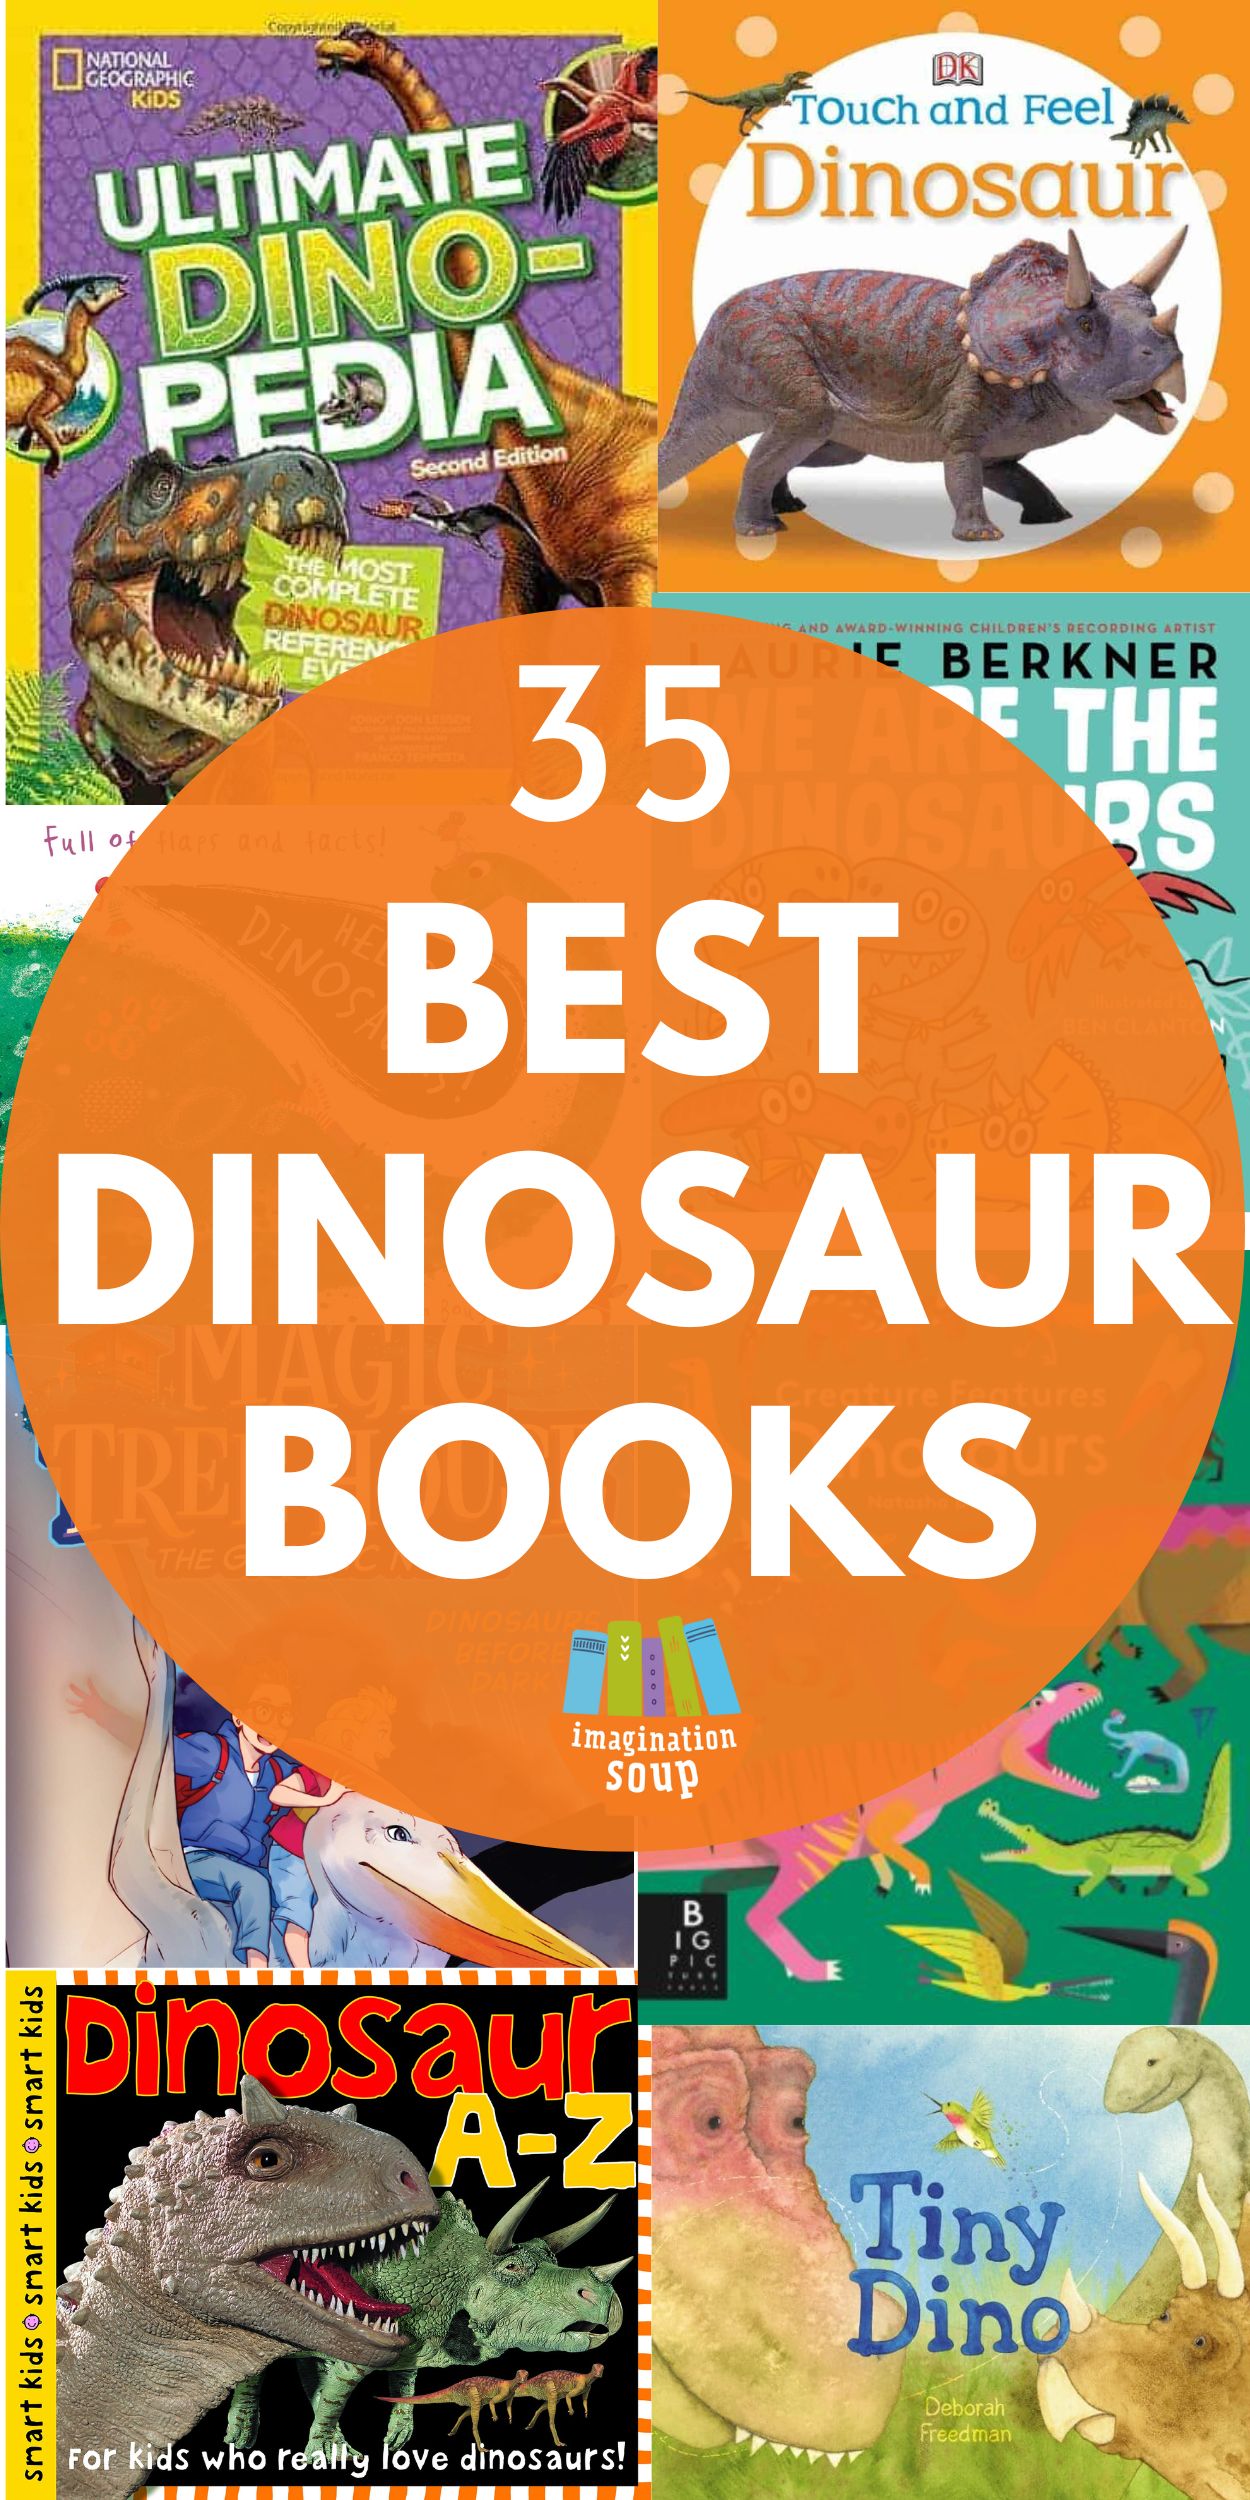 Ready for the best dinosaur books for kids of all ages --that they'll love? These are the best nonfiction book choices for growing readers who love dinosaurs.